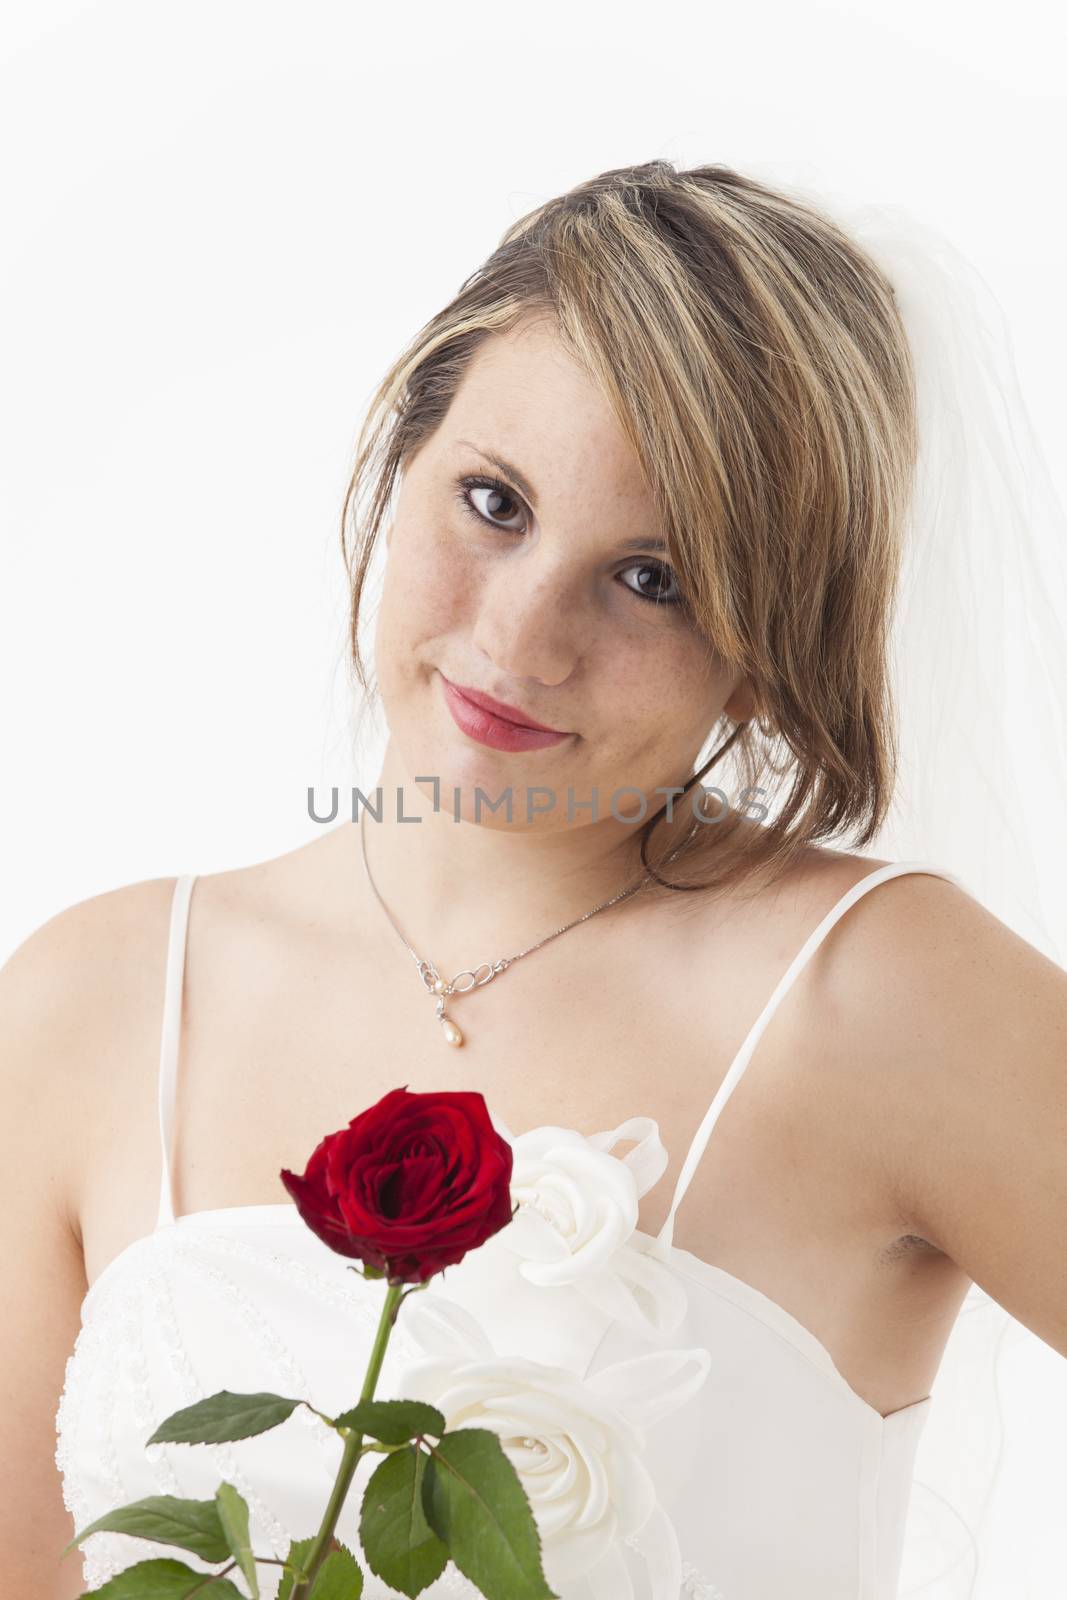 young bride with a red rose